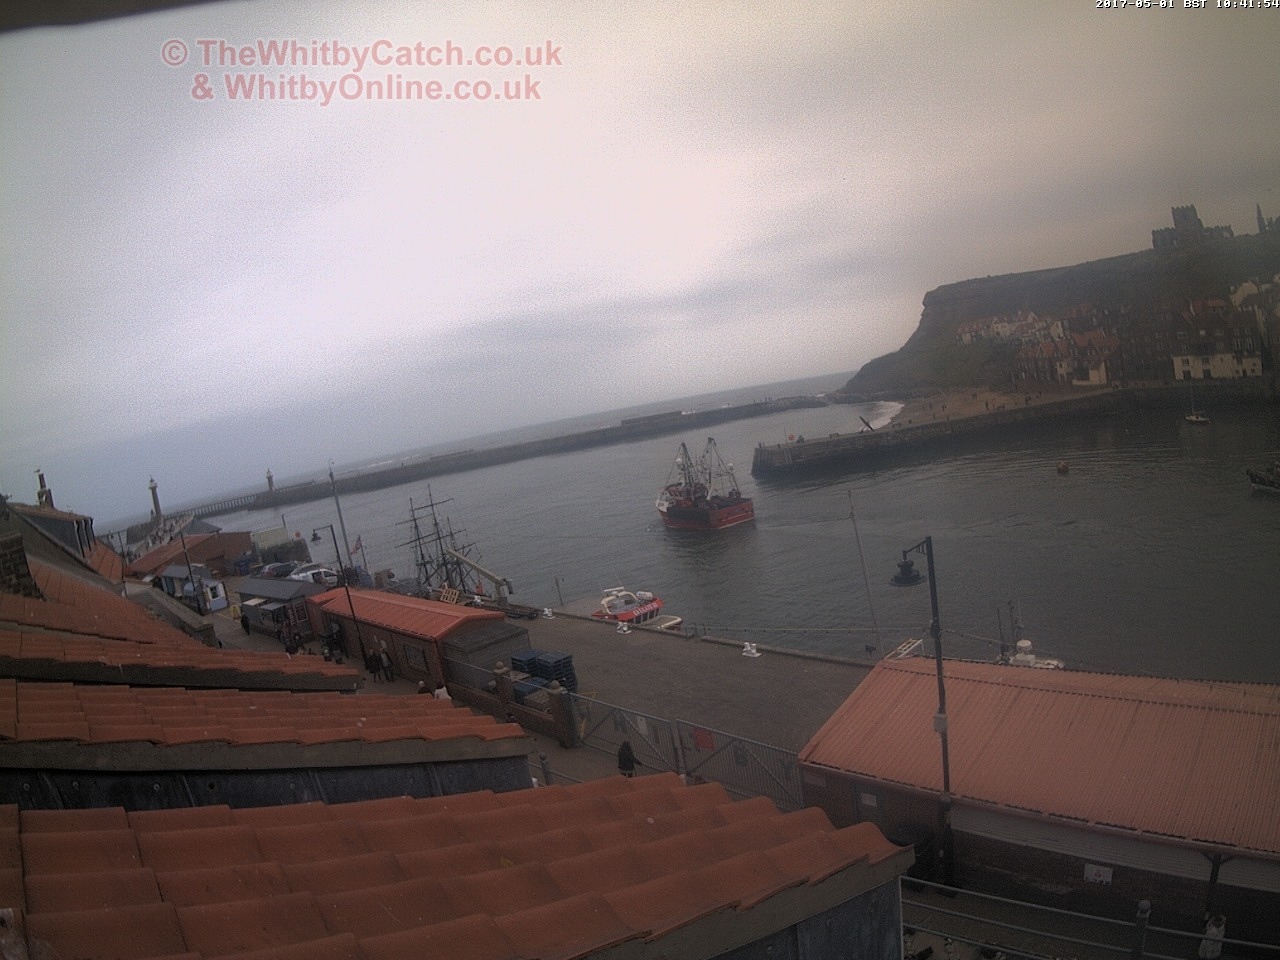 Whitby Mon 1st May 2017 10:42.